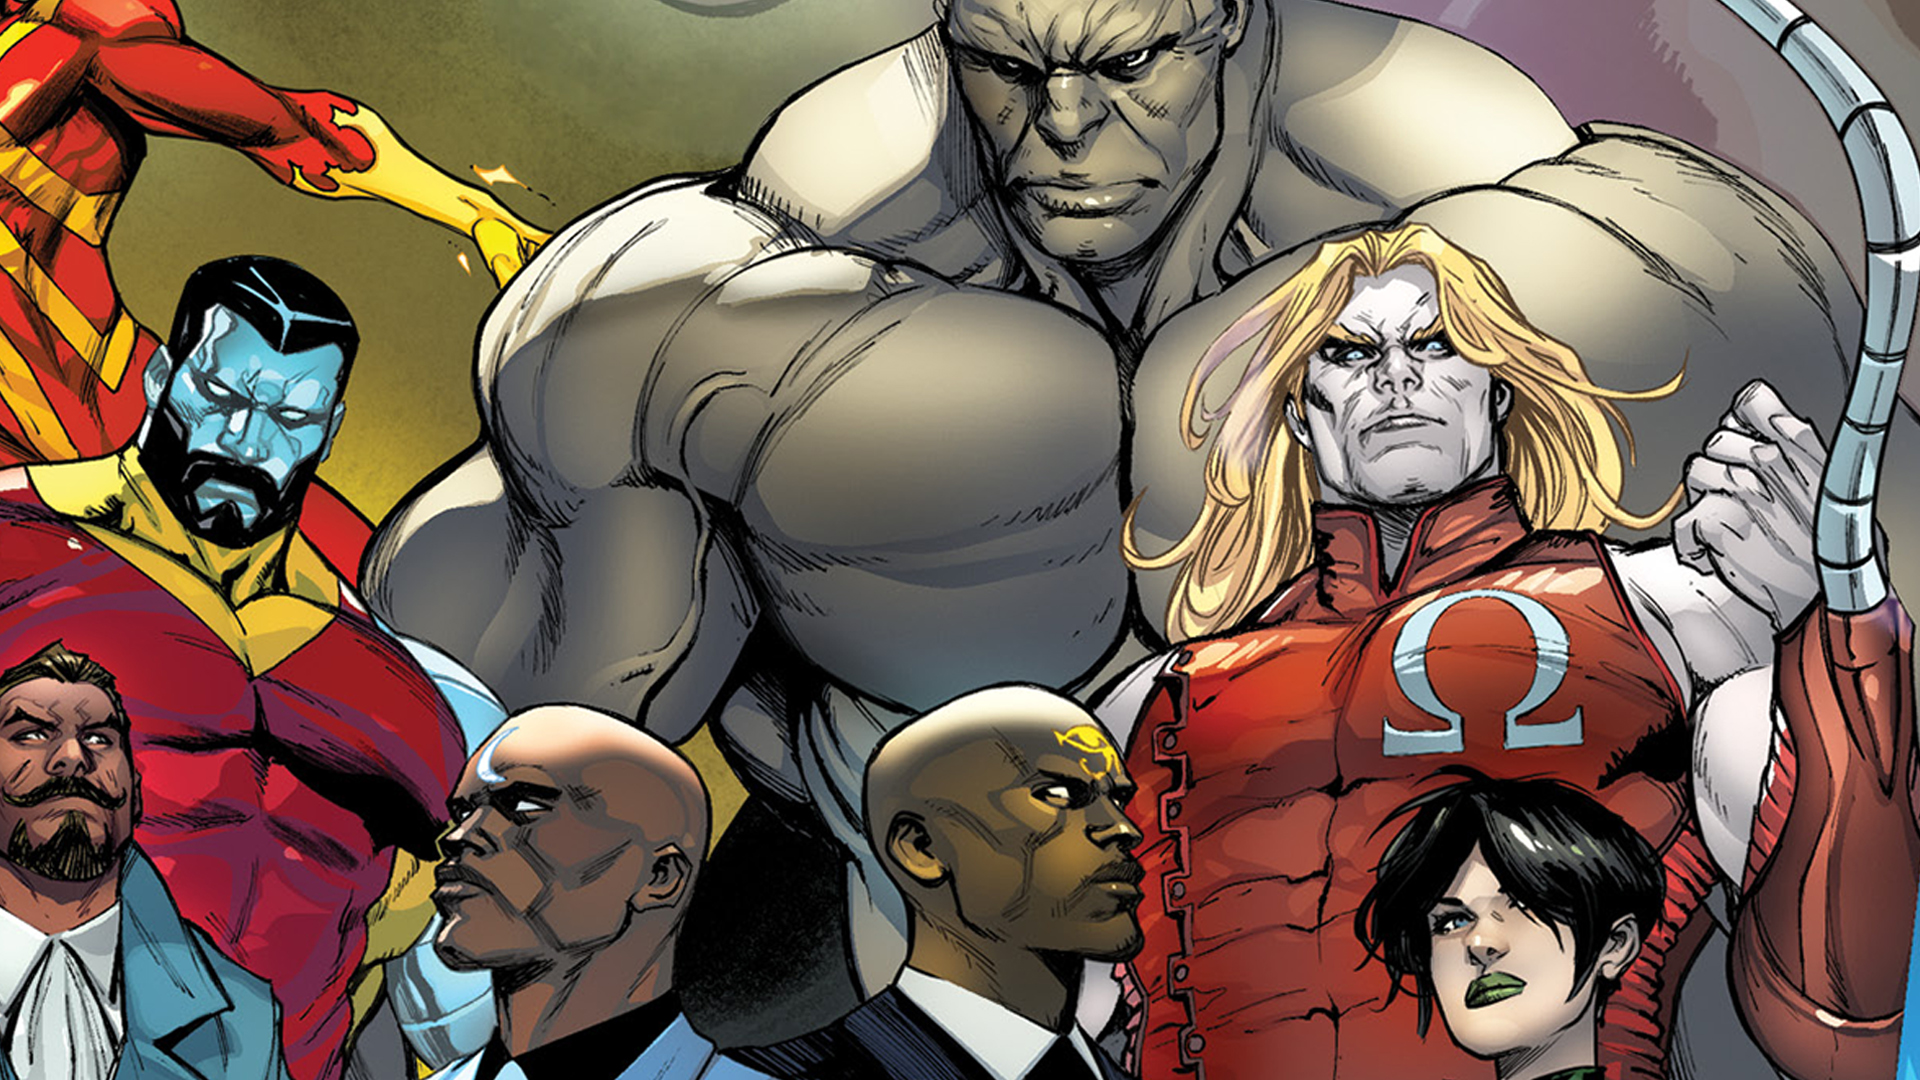  Marvel's new Ultimate Universe turns one year old with a special one-shot this December 